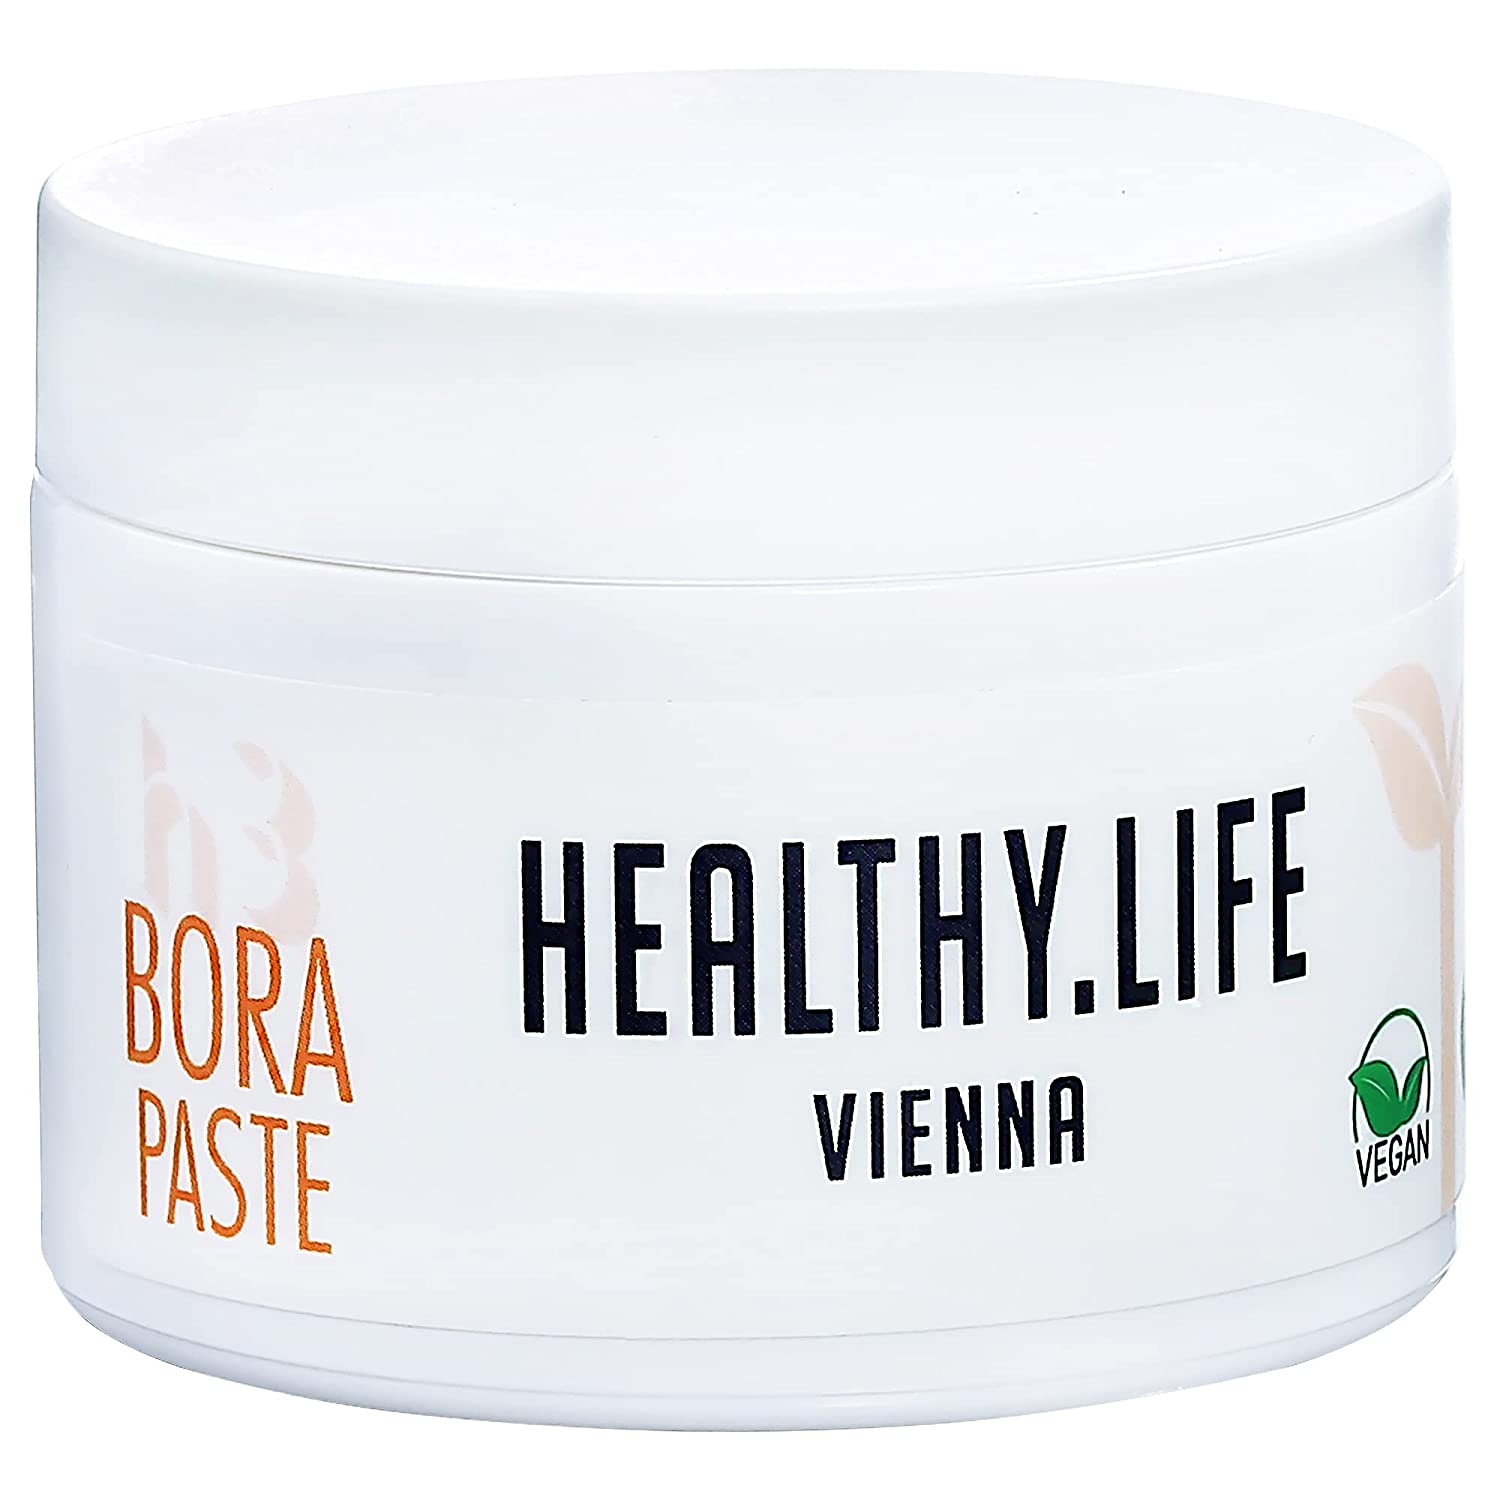 healthy.life Healthy Life Vienna Bora Paste Vegan Hair Paste Styling Products - Hair Matte Paste for Men / Women, Natural Paste for Textured Looks and Volume Matte Finish, Holding Factor 3, 50 ml